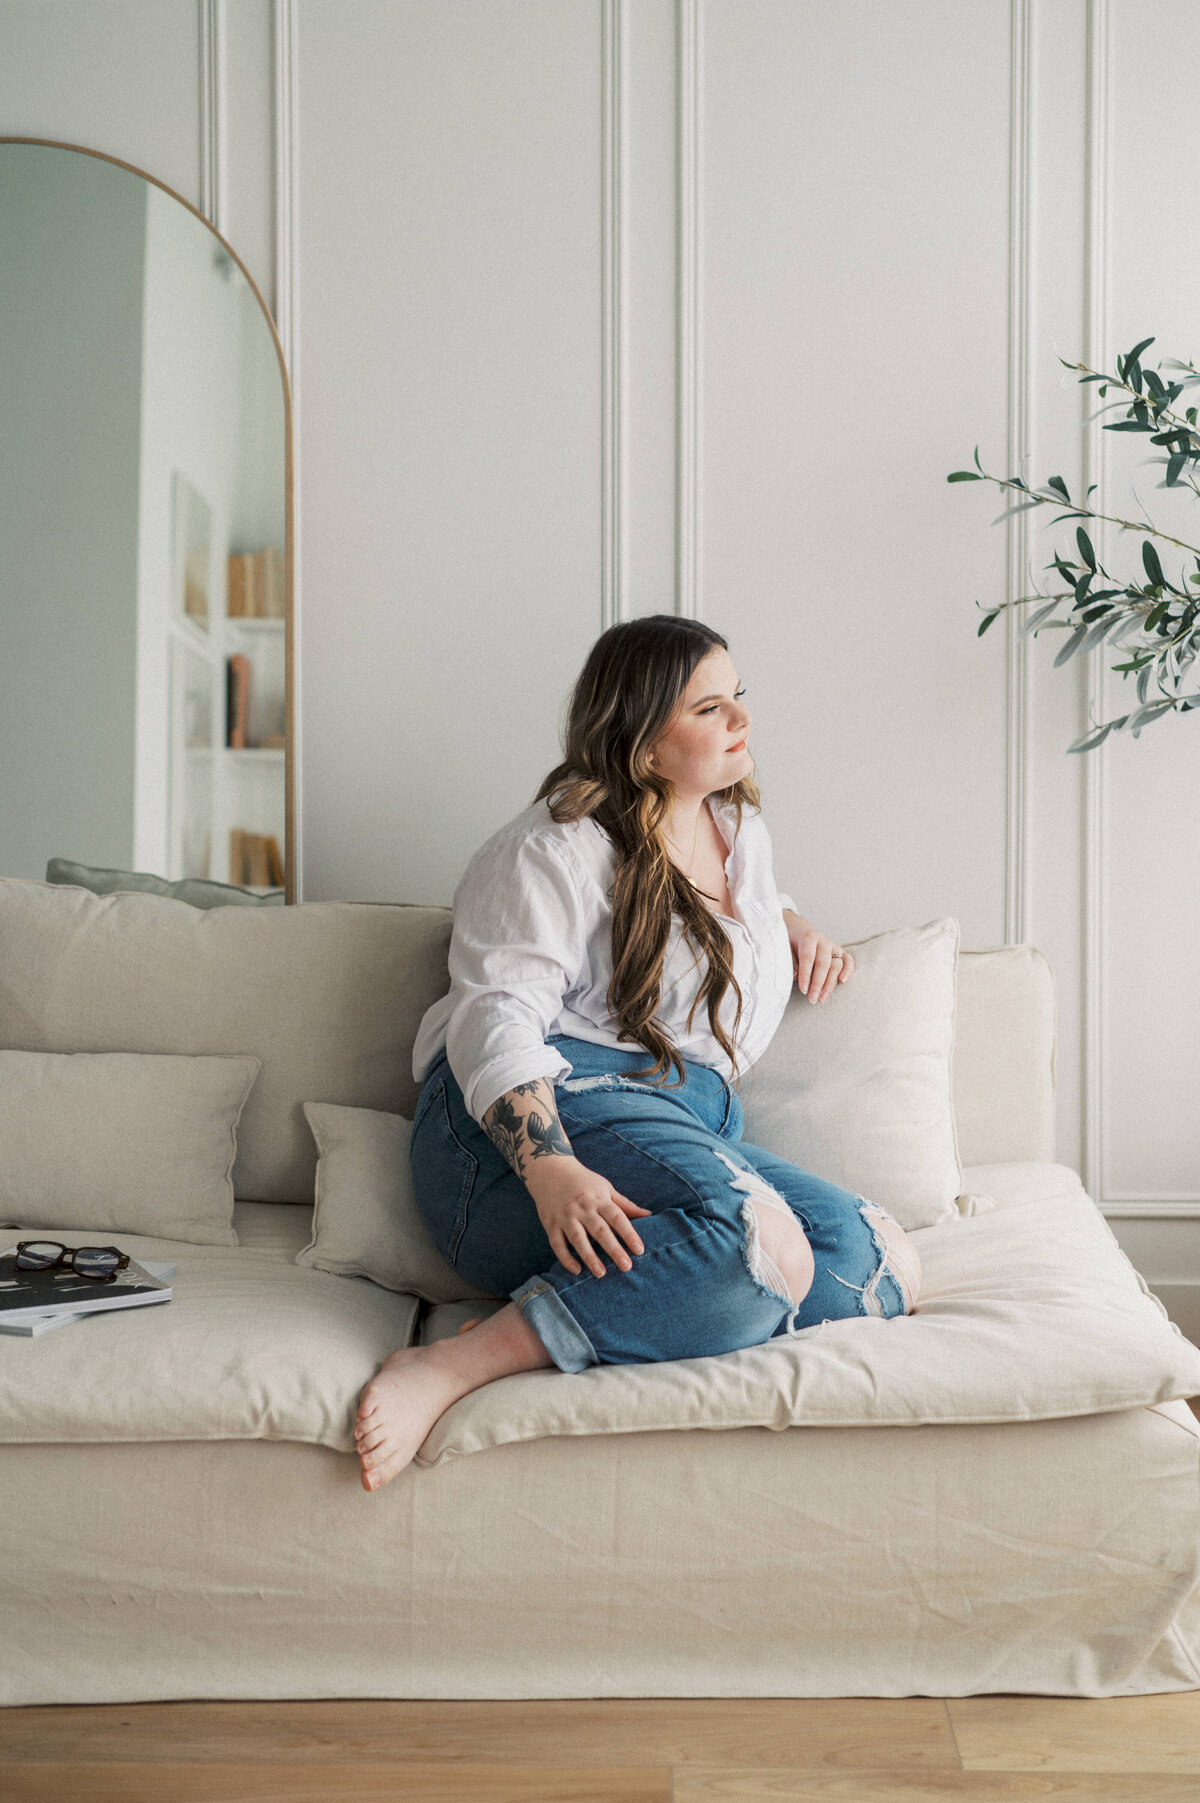 Brand photo of woman sitting on white couch wearing white shirt and blue jeans